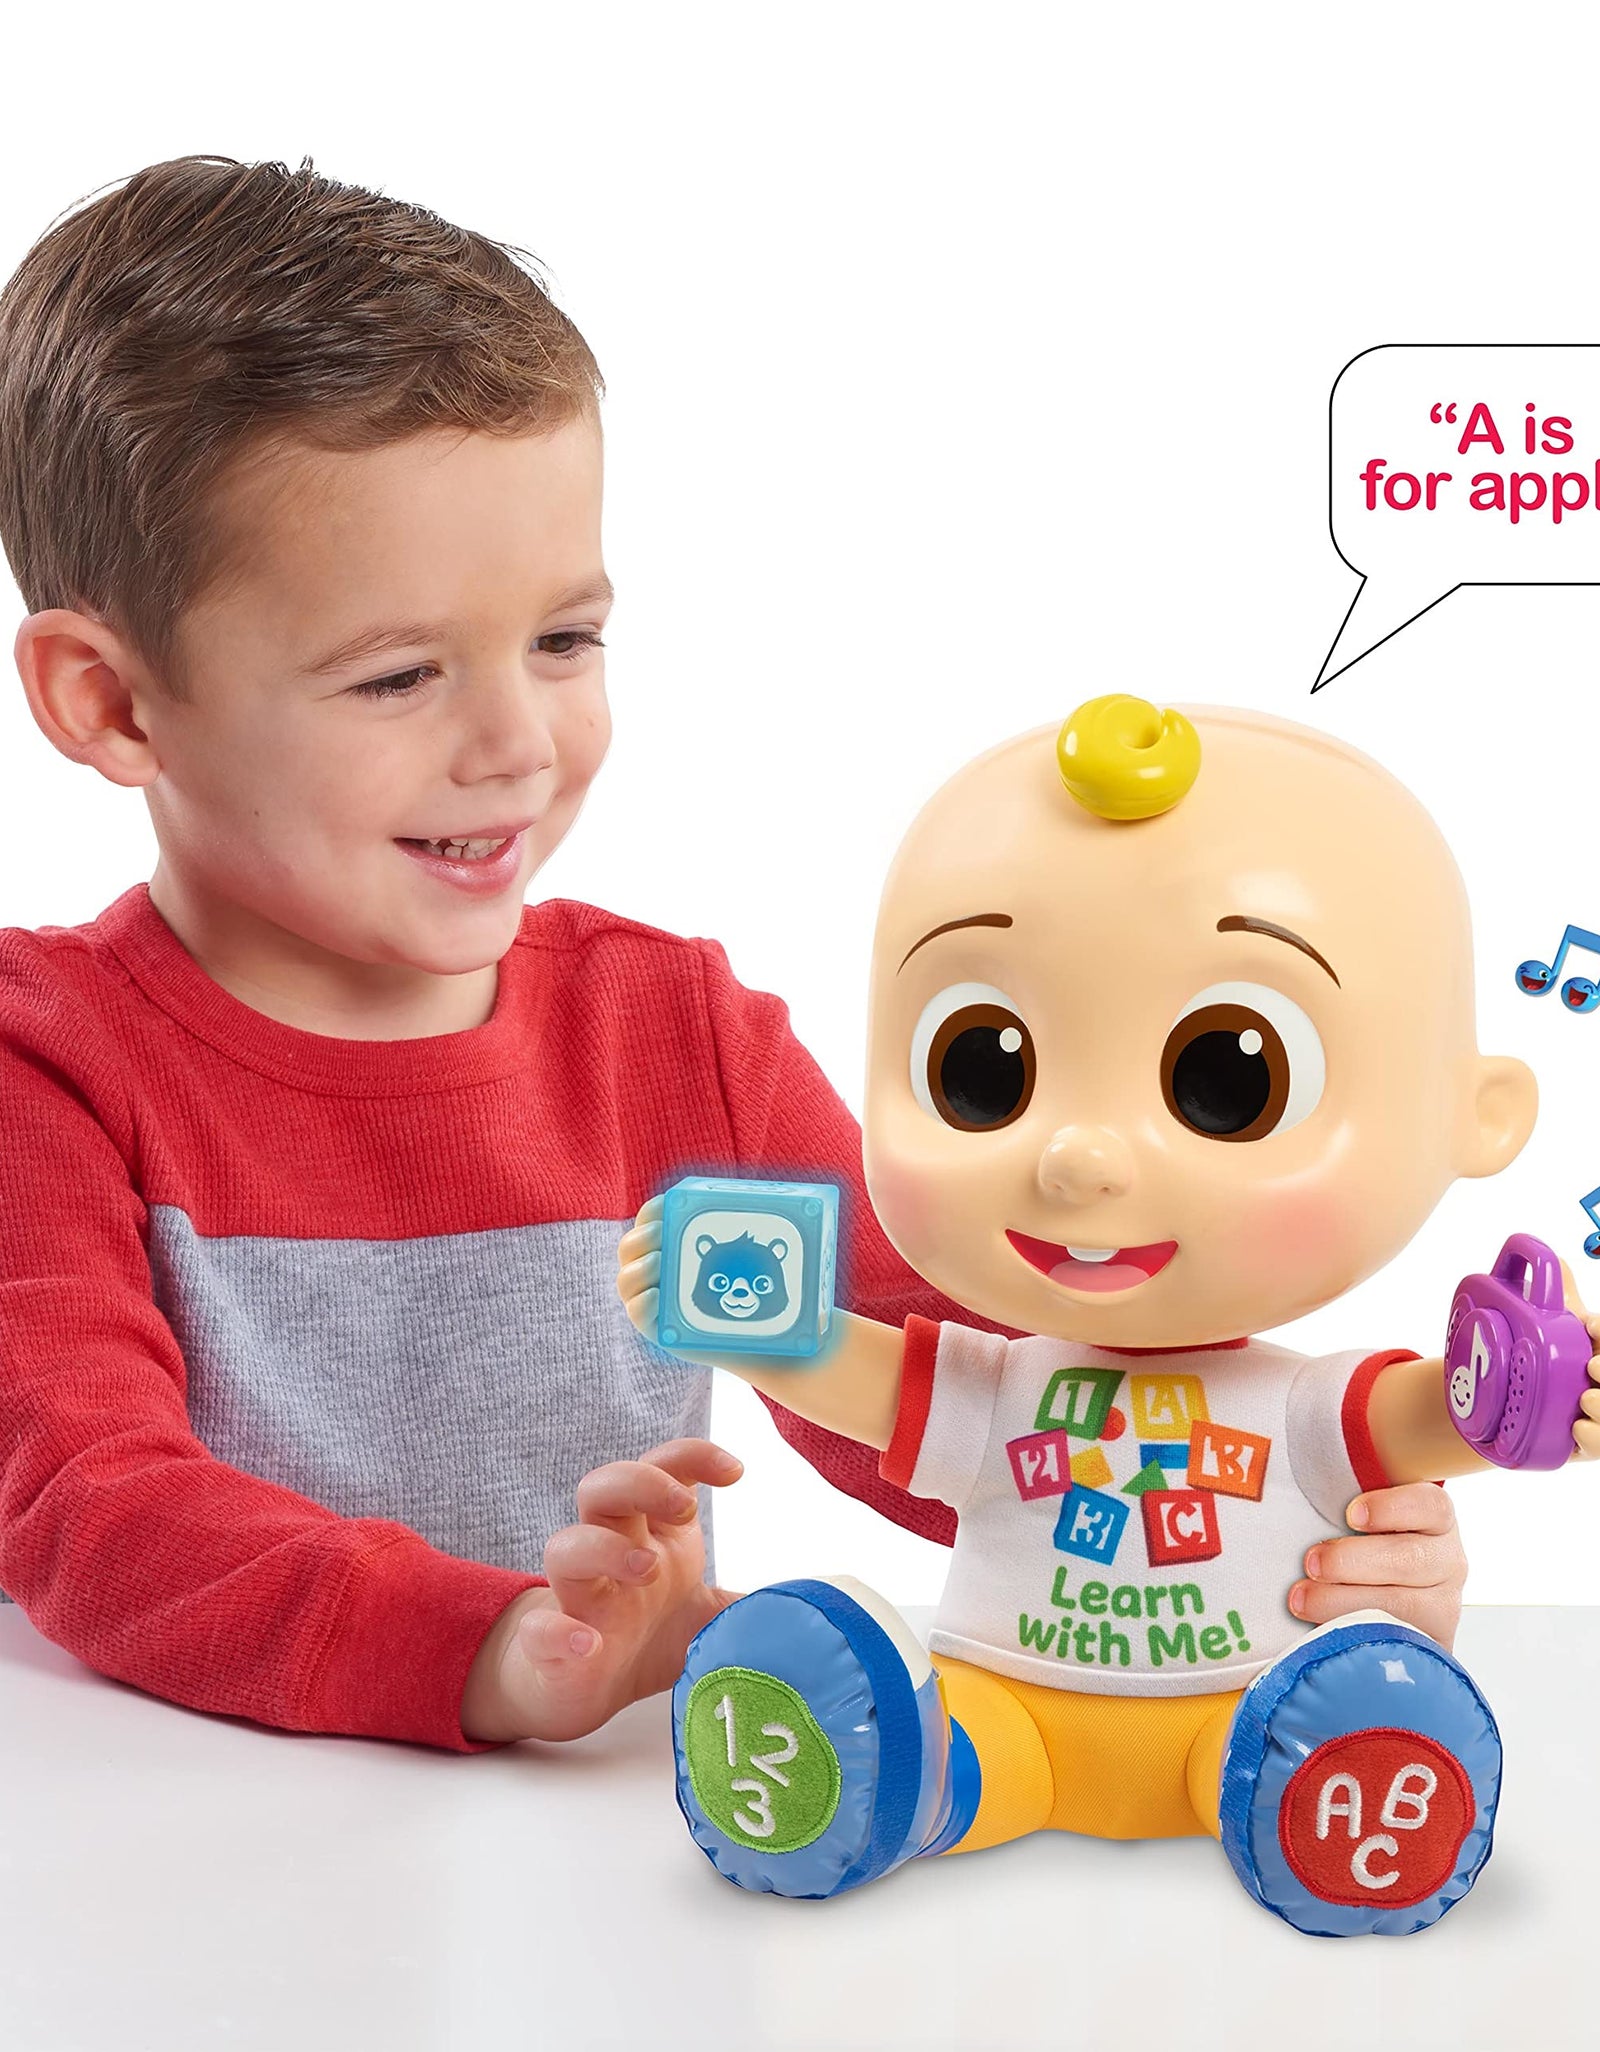 CoComelon Interactive Learning JJ Doll with Lights, Sounds, and Music to Encourage Letter, Number, and Color Recognition, by Just Play